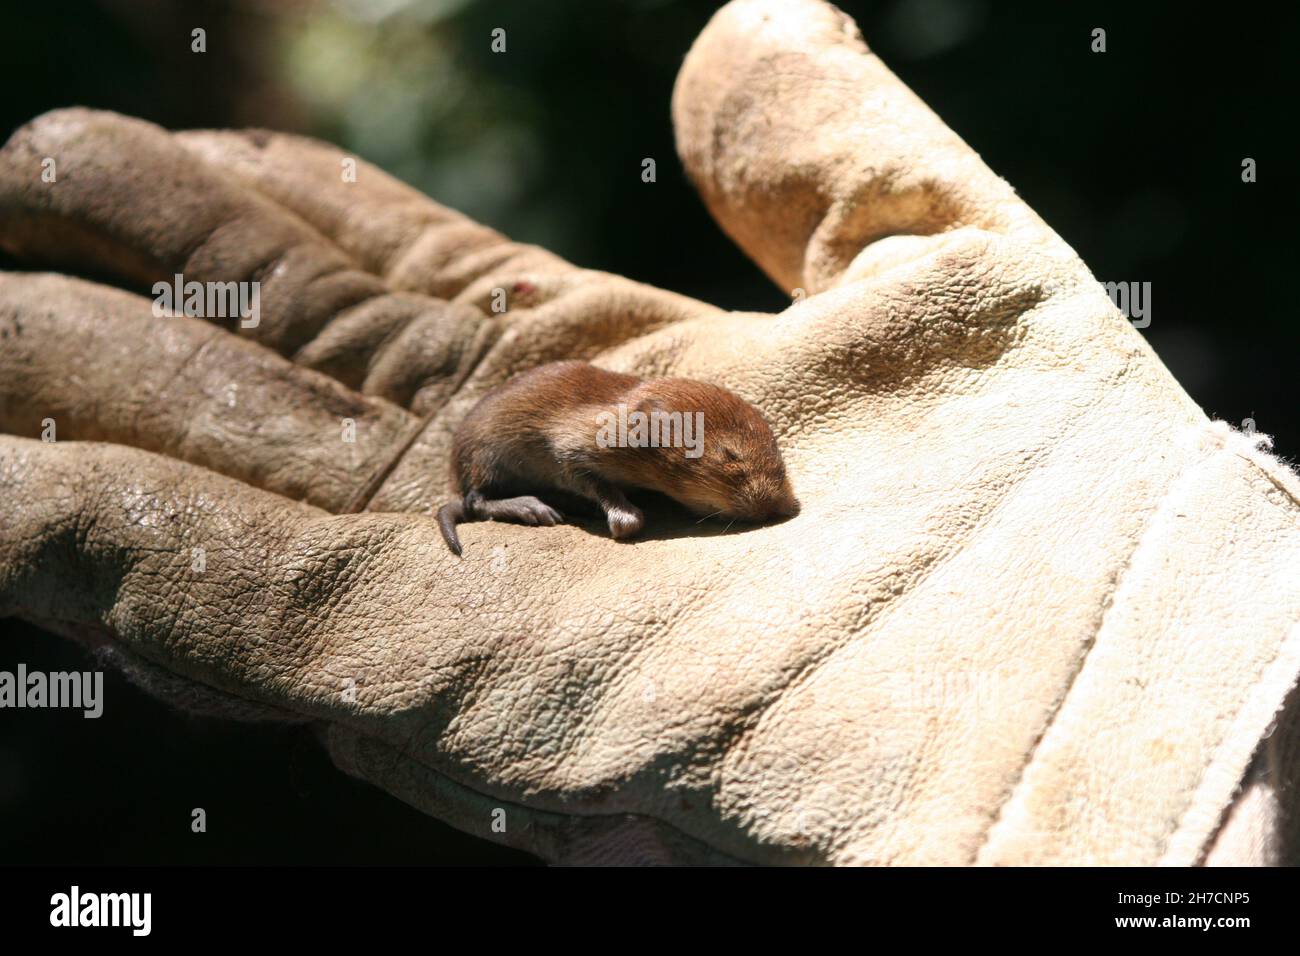 young vole in a hand with glove, Germany Stock Photo